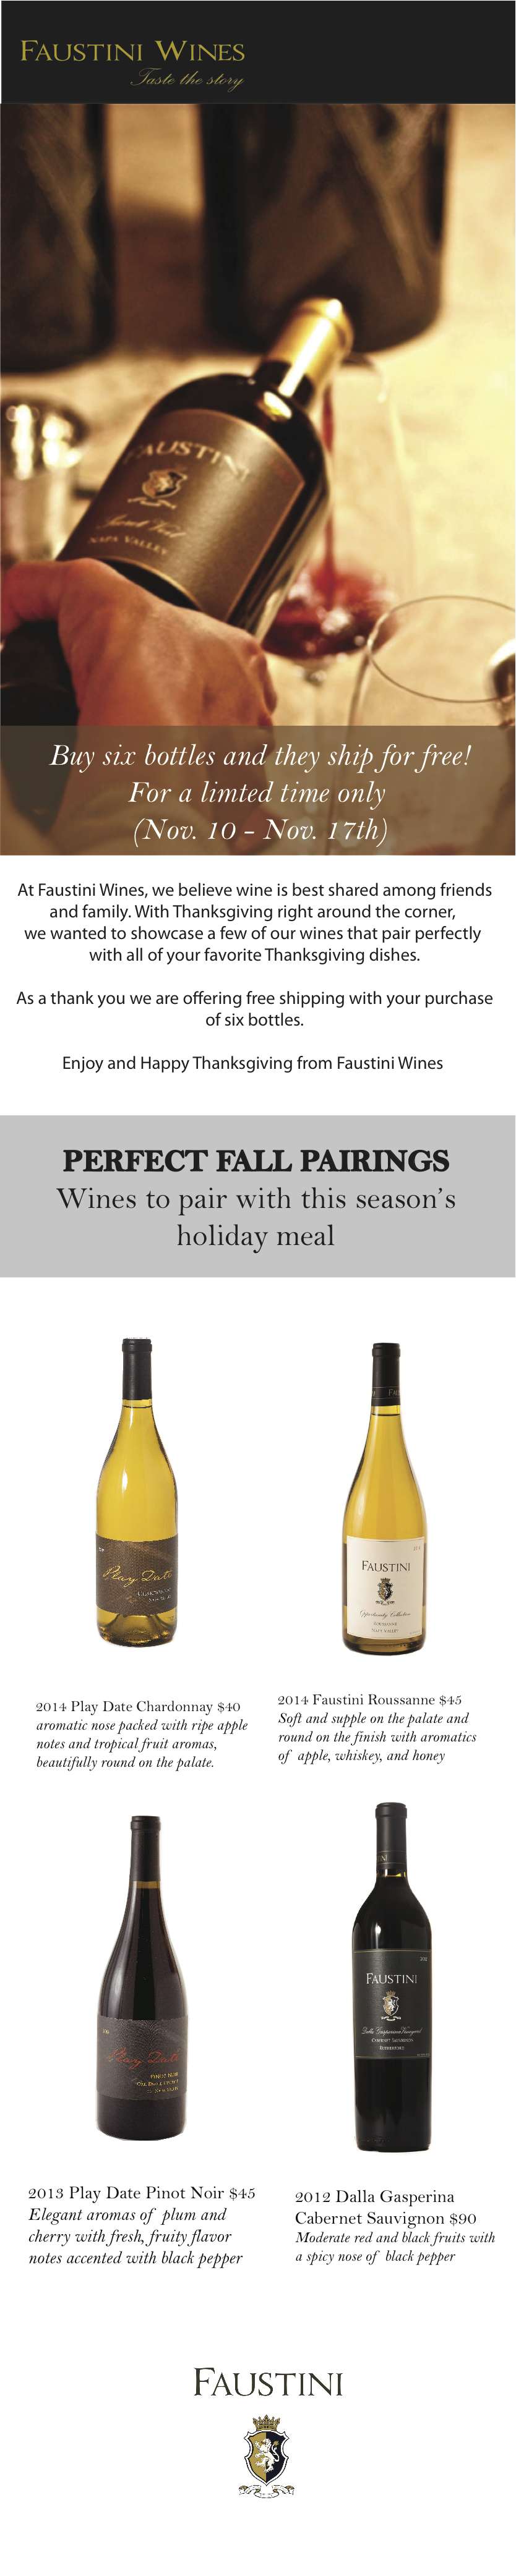 Thanksgivingspecial3 Faustini Wines Update